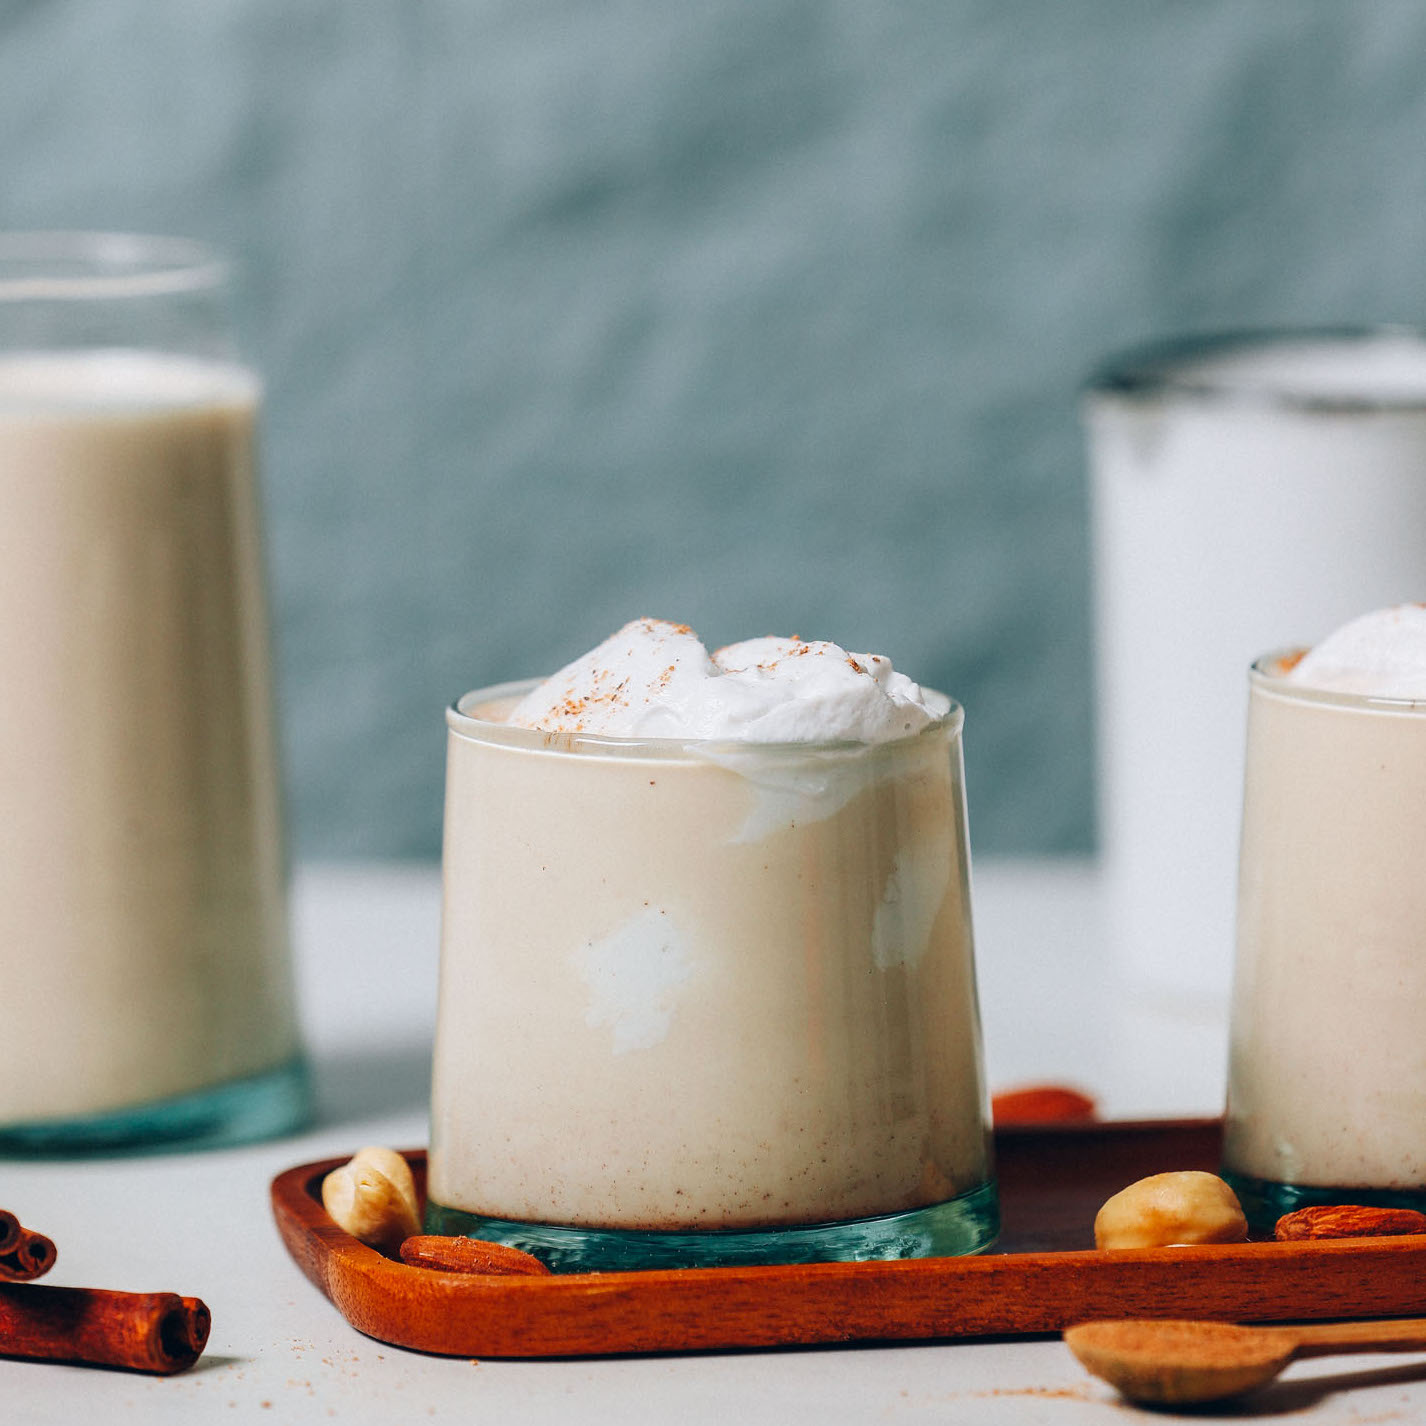 Glasses of our Vegan Eggnog recipe for a festive holiday drink